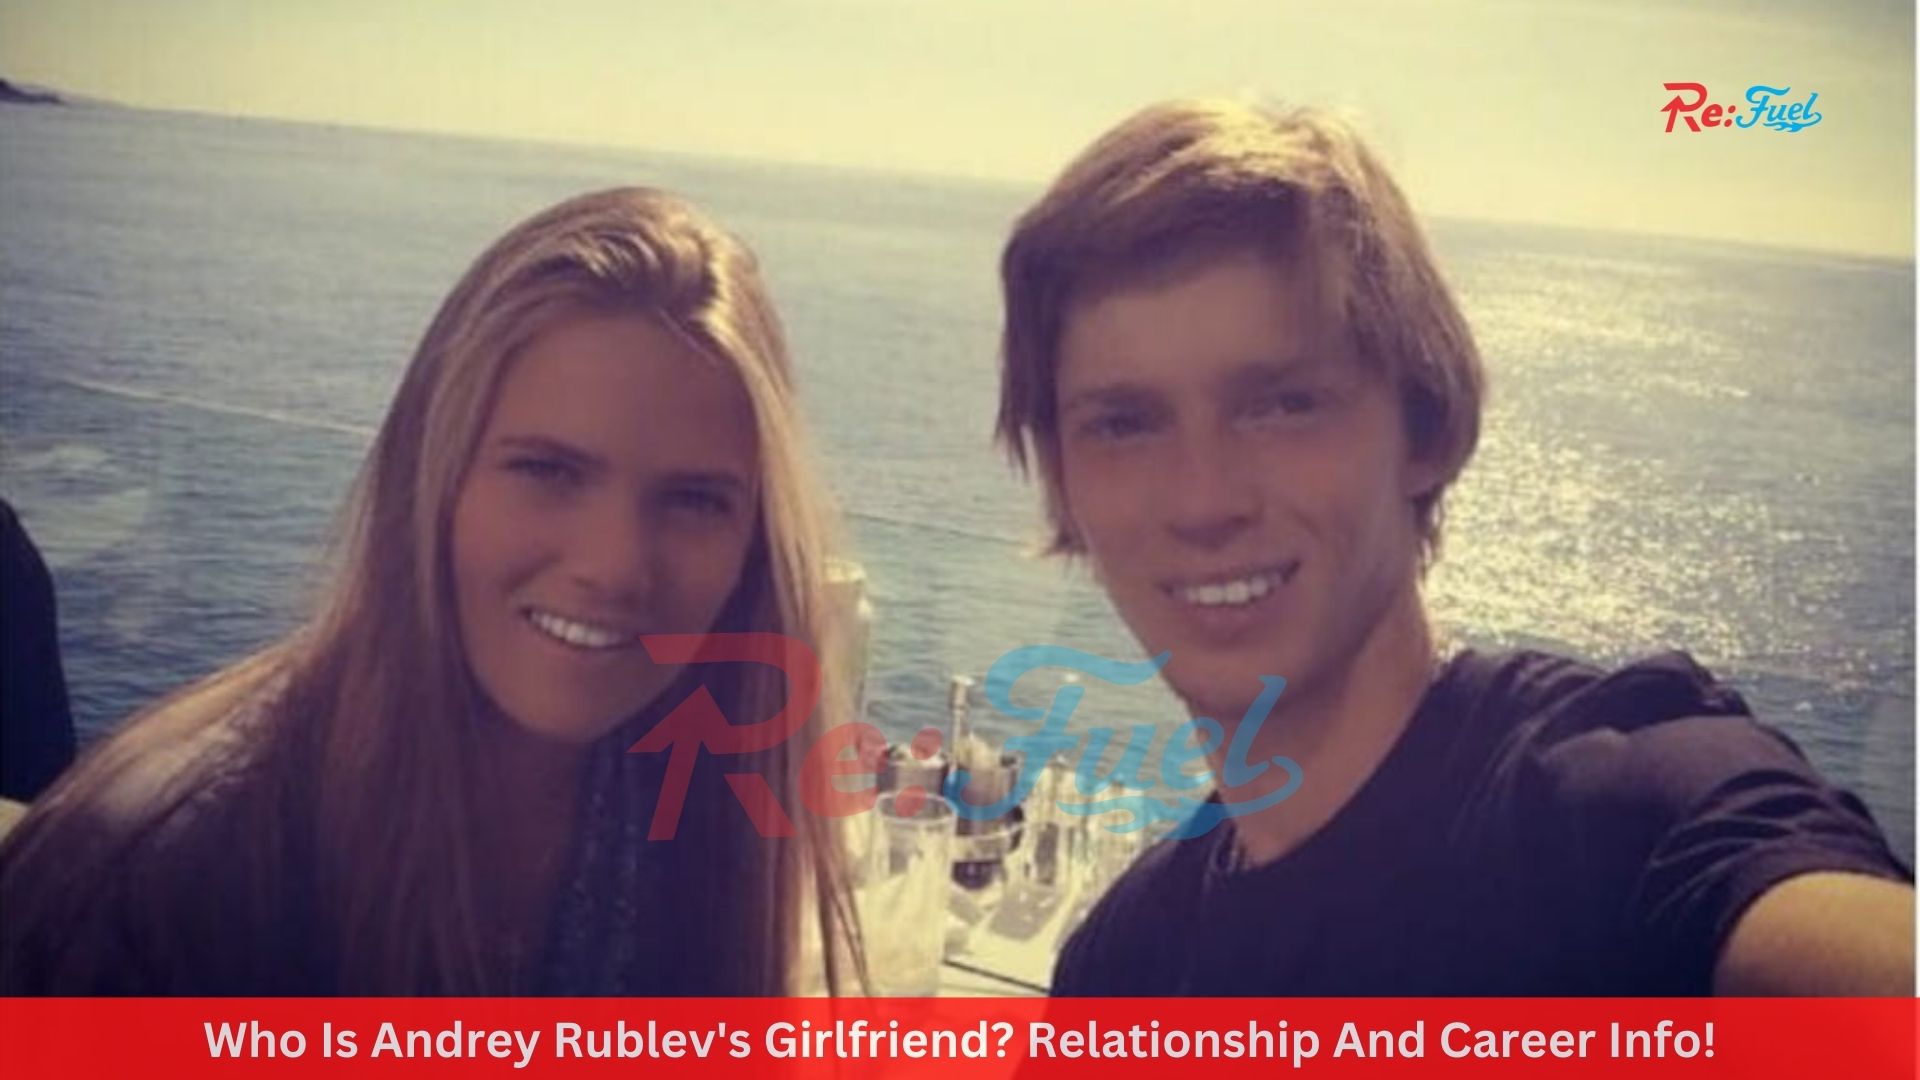 Who Is Andrey Rublev's Girlfriend? Relationship And Career Info!